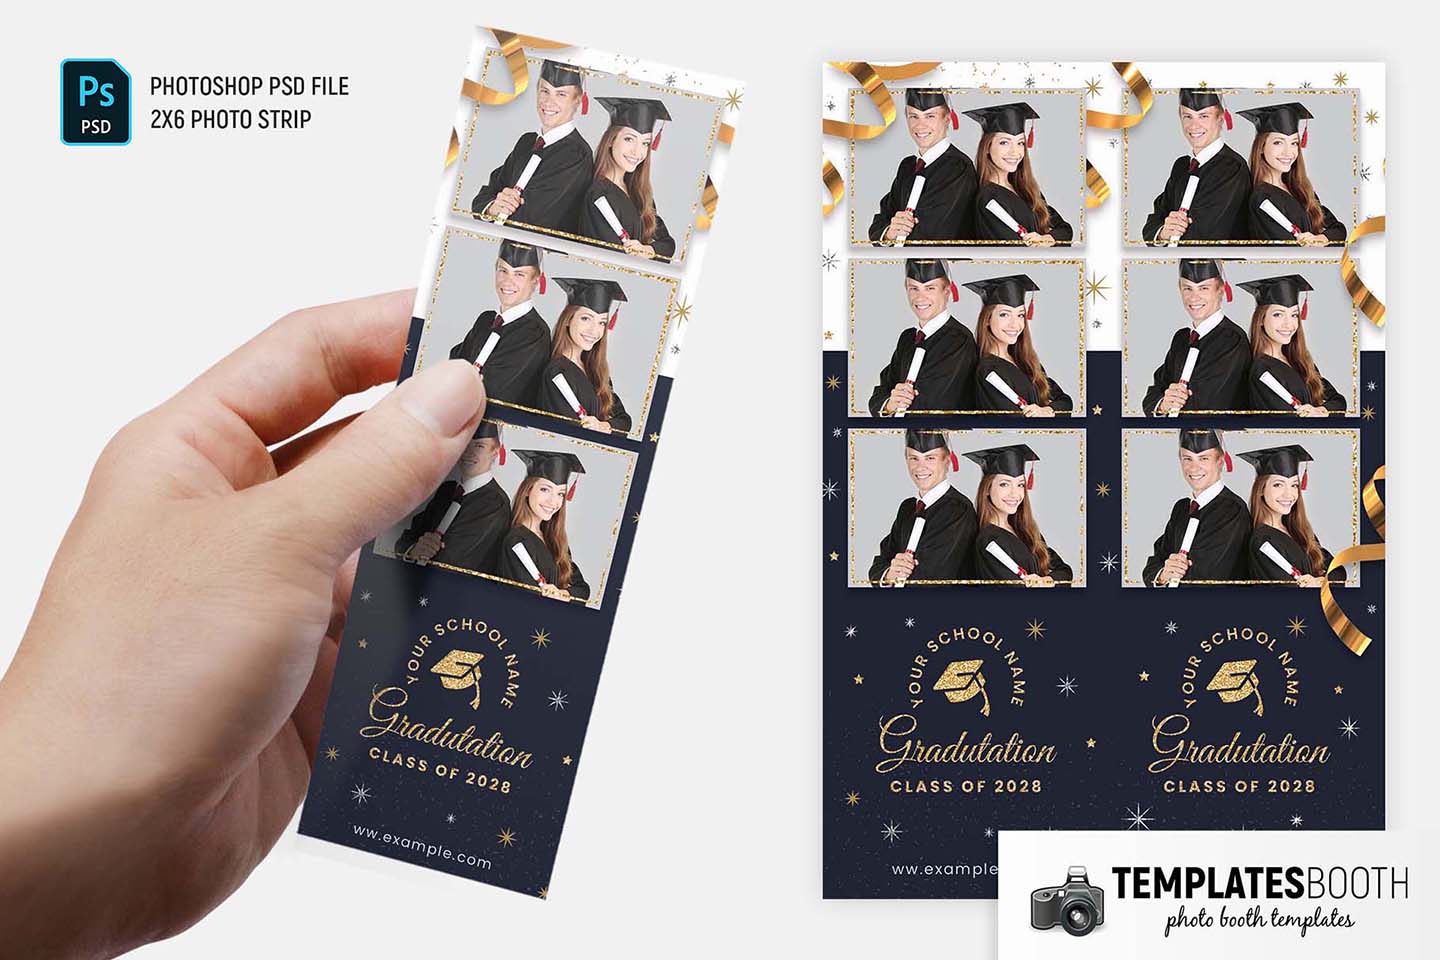 Graduation Party Photo Booth Template TemplatesBooth